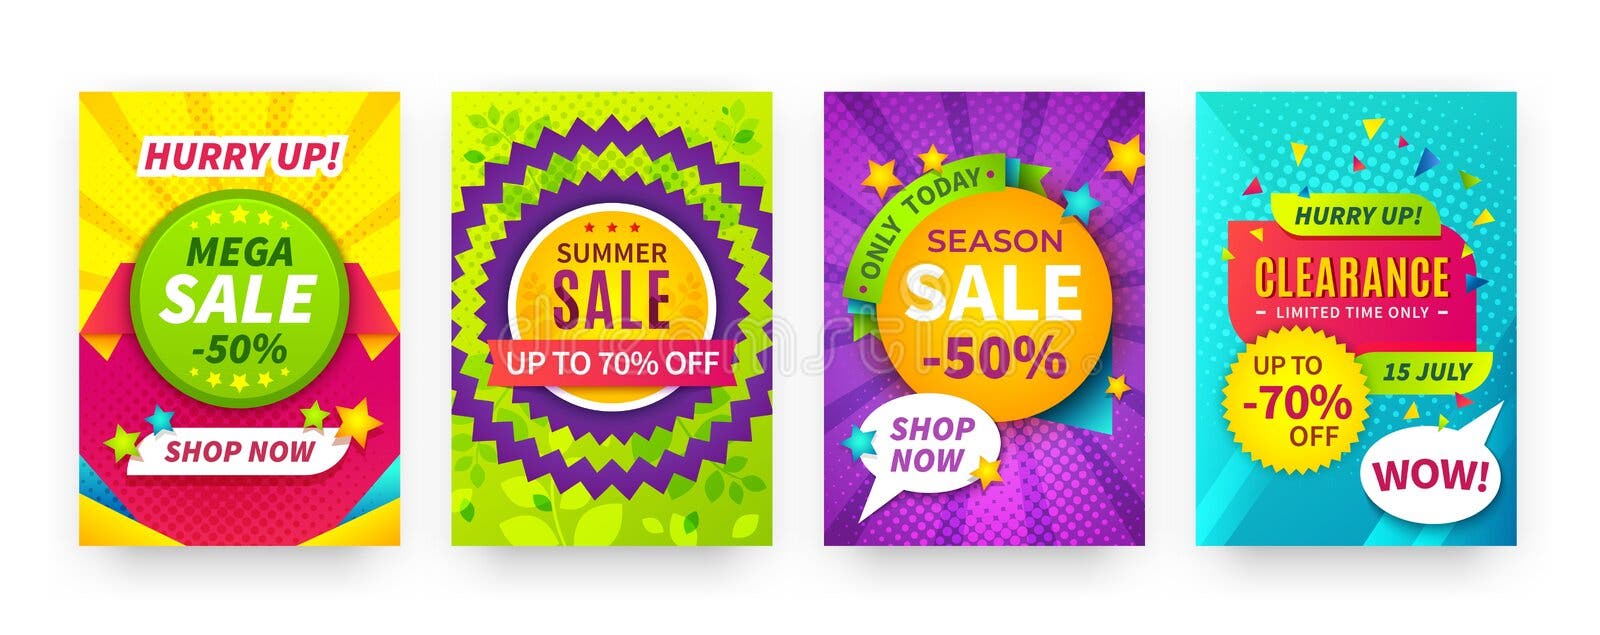 Todays Deal Shopping Sale Vector Text Stock Vector (Royalty Free